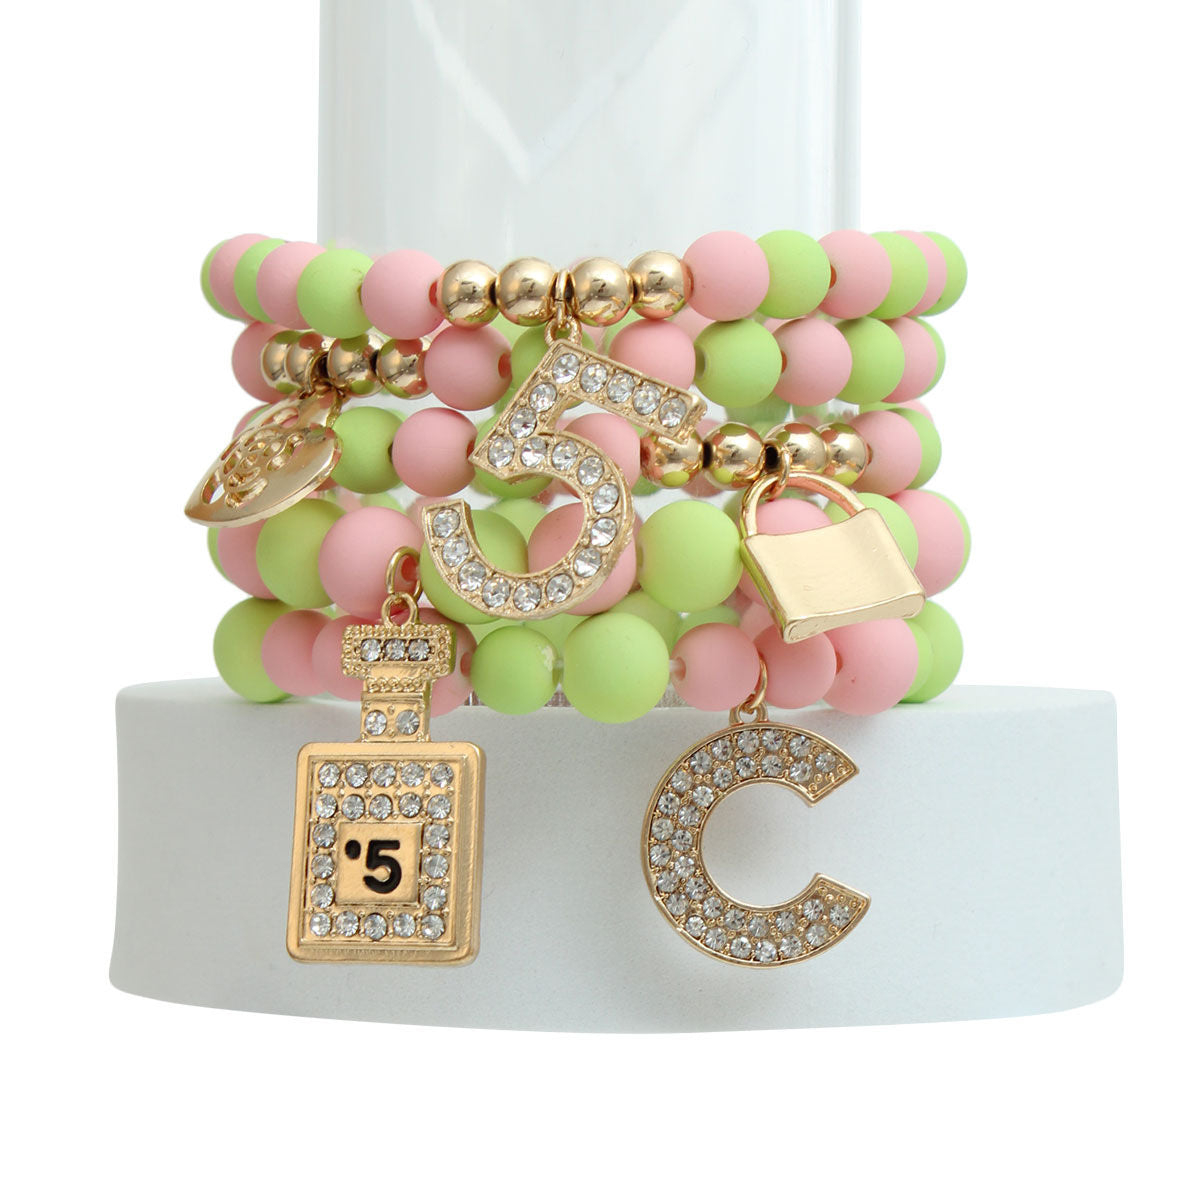 Matte Pink and Green Boutique Charm Bracelets